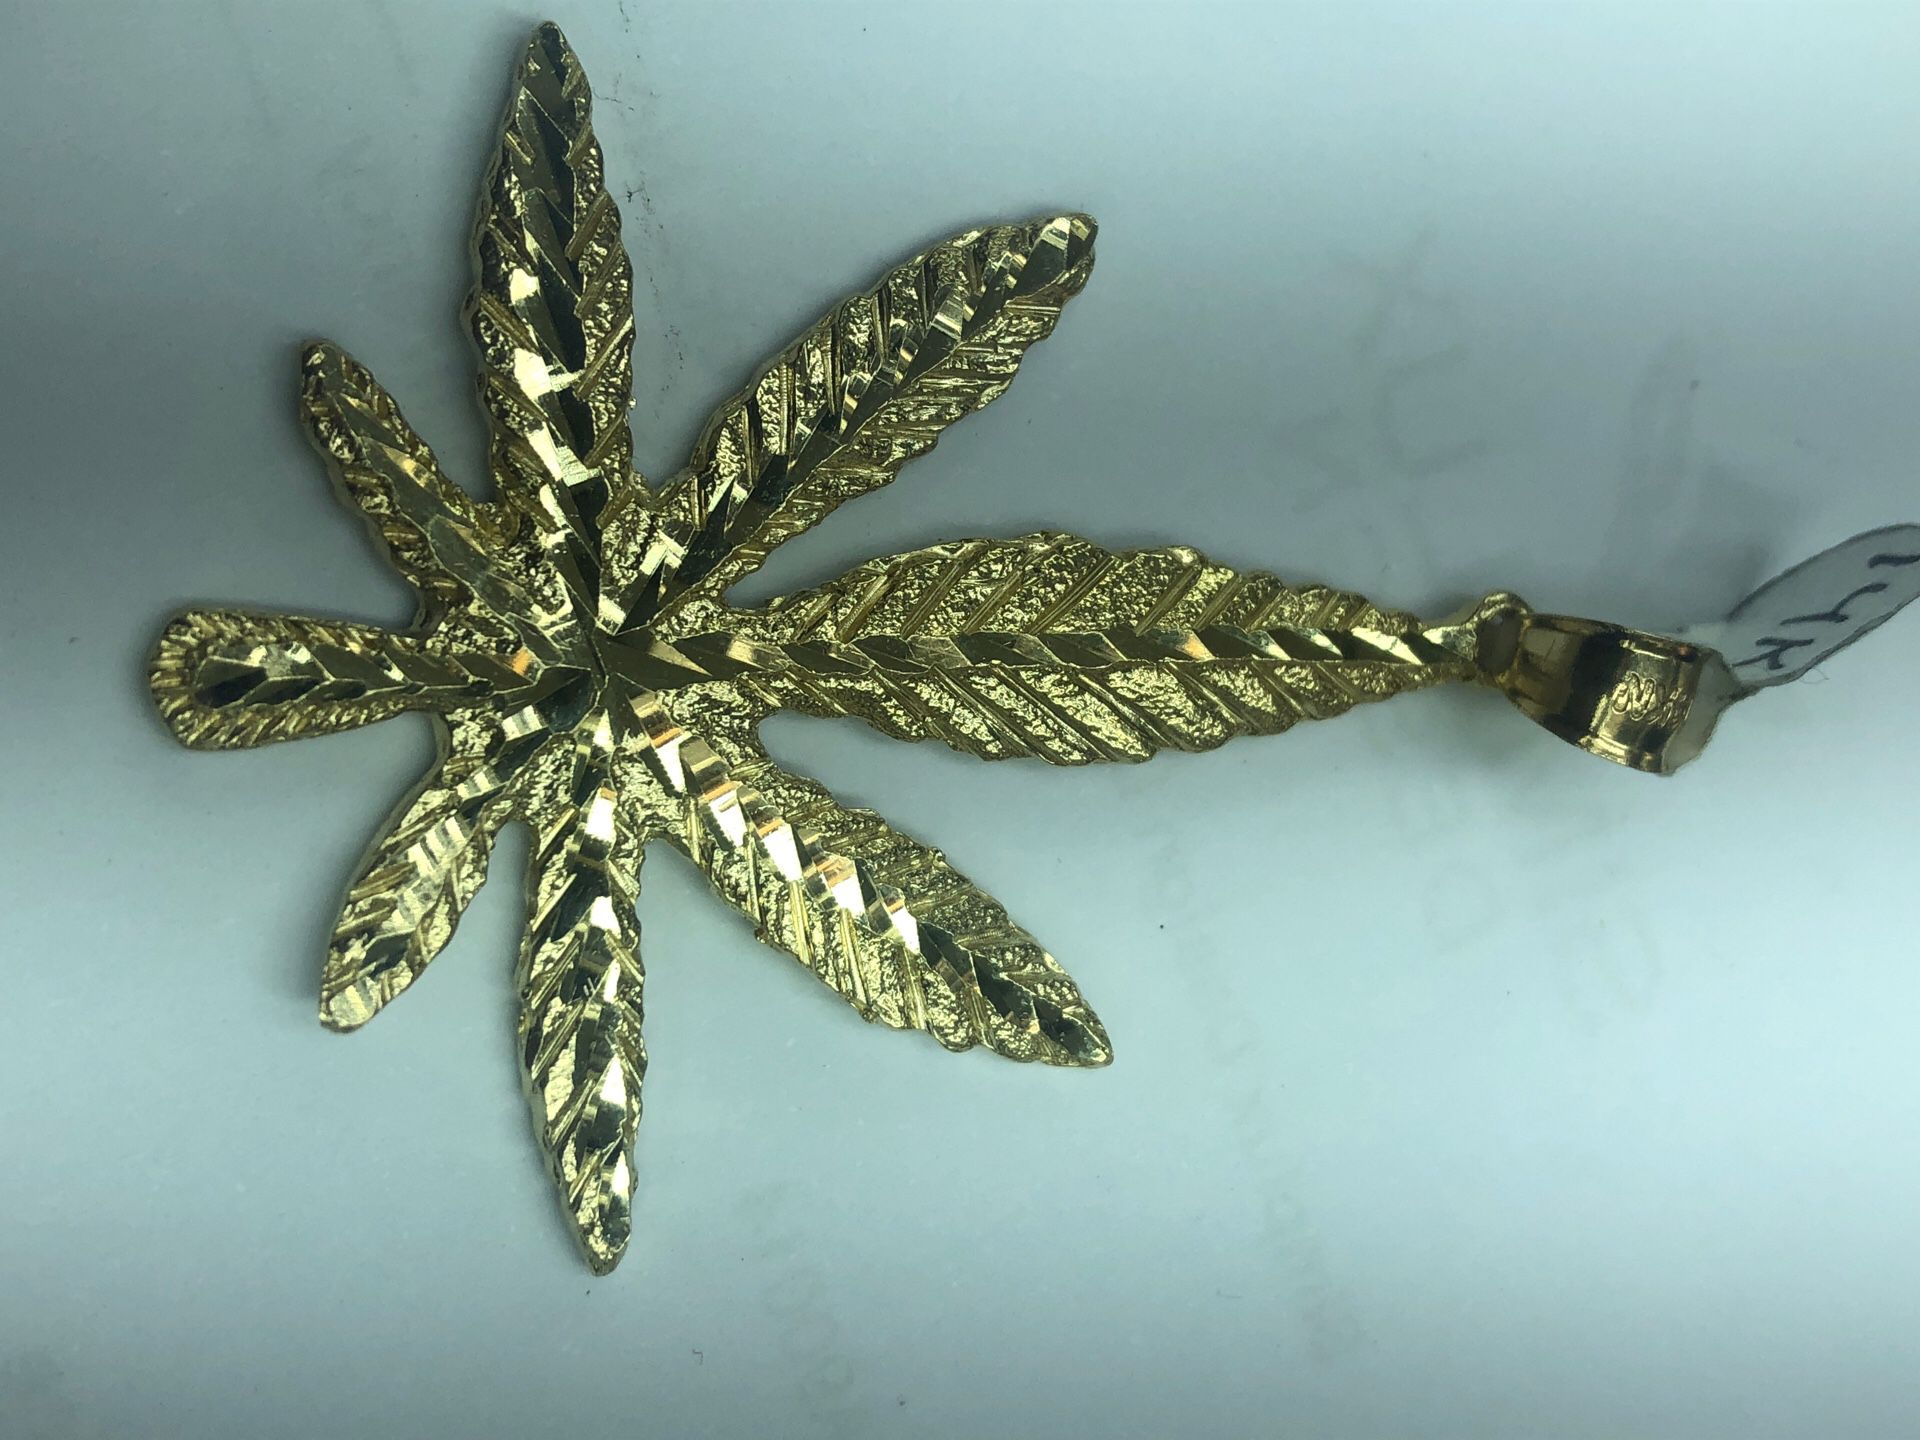 14k gold charm very solid and heavy almost 10 grams of gold Rafaela jewelry located at 758 south Broadway la ca 90014. we are open 7 days a week fr